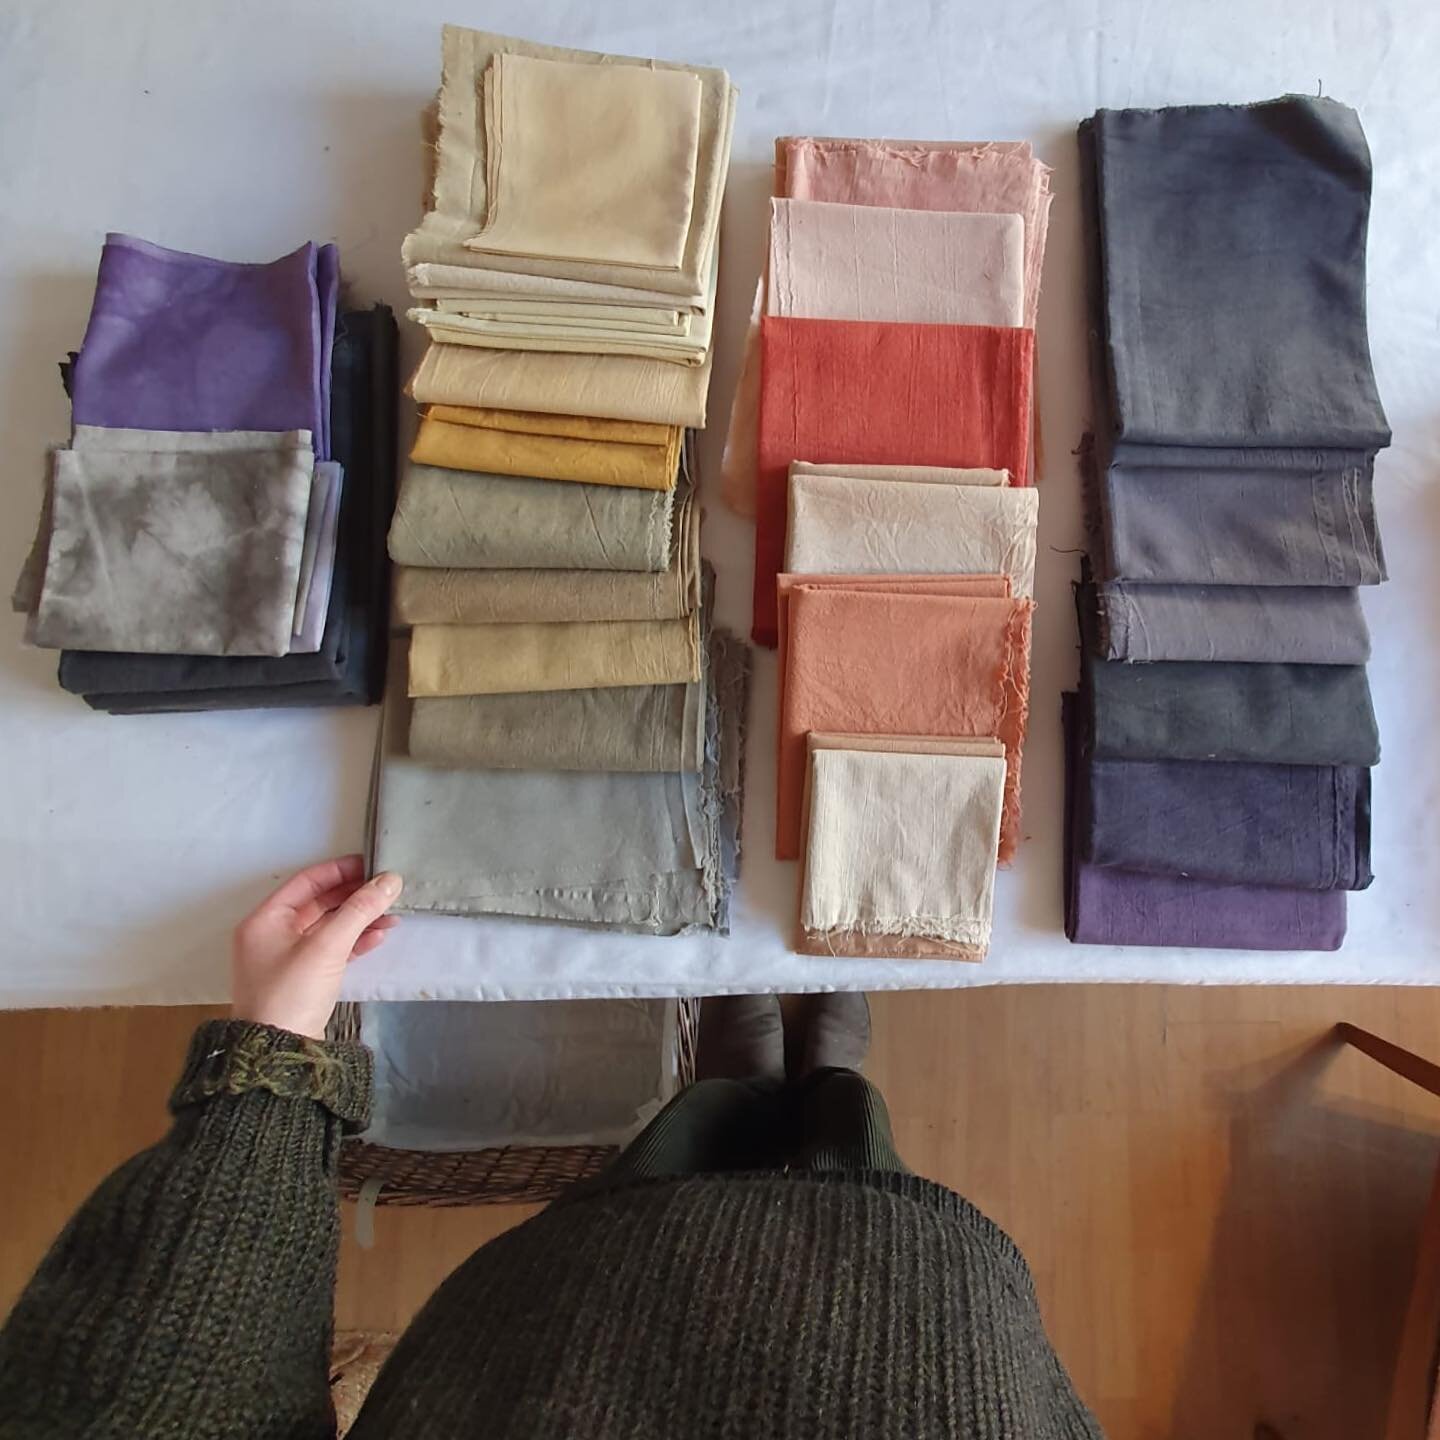 One of the first jobs in the new studio was to iron and take stock of my naturally dyed fabric from 2023. Very satisfying. Now thinking about the sort of quilt I&rsquo;d like to make with some of these colours. Patchwork or appliqu&eacute; design? A 